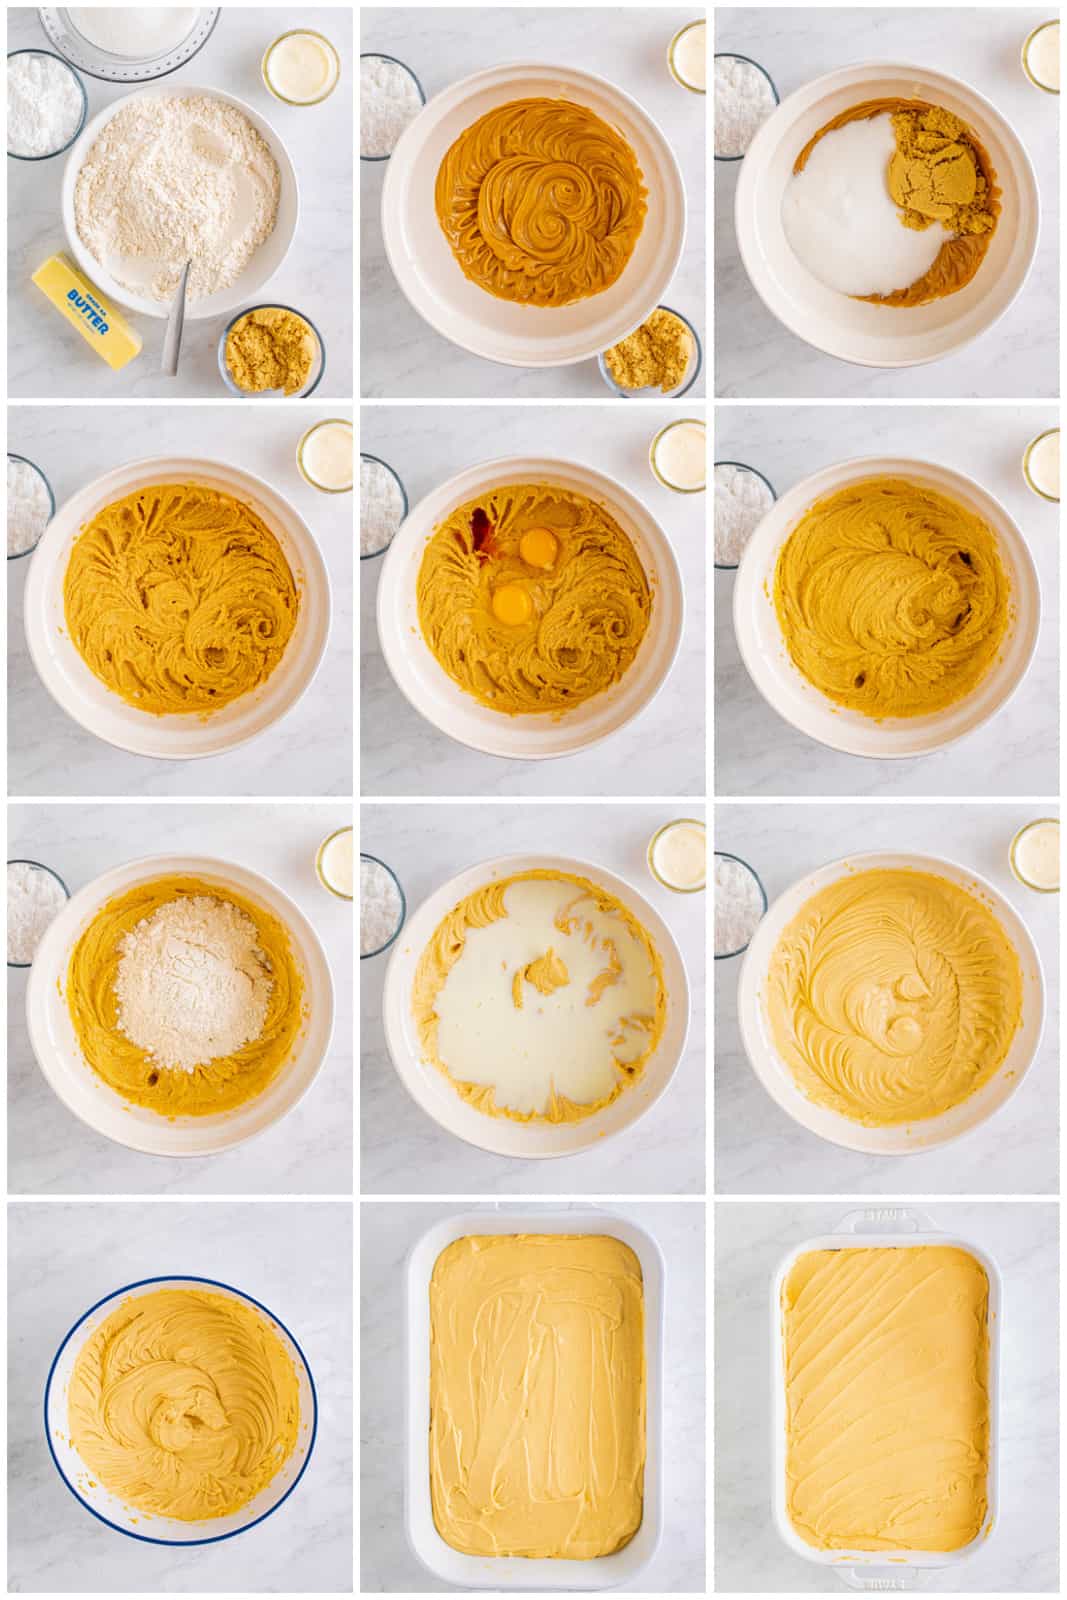 Step by step photos on how to make Peanut Butter Cake.